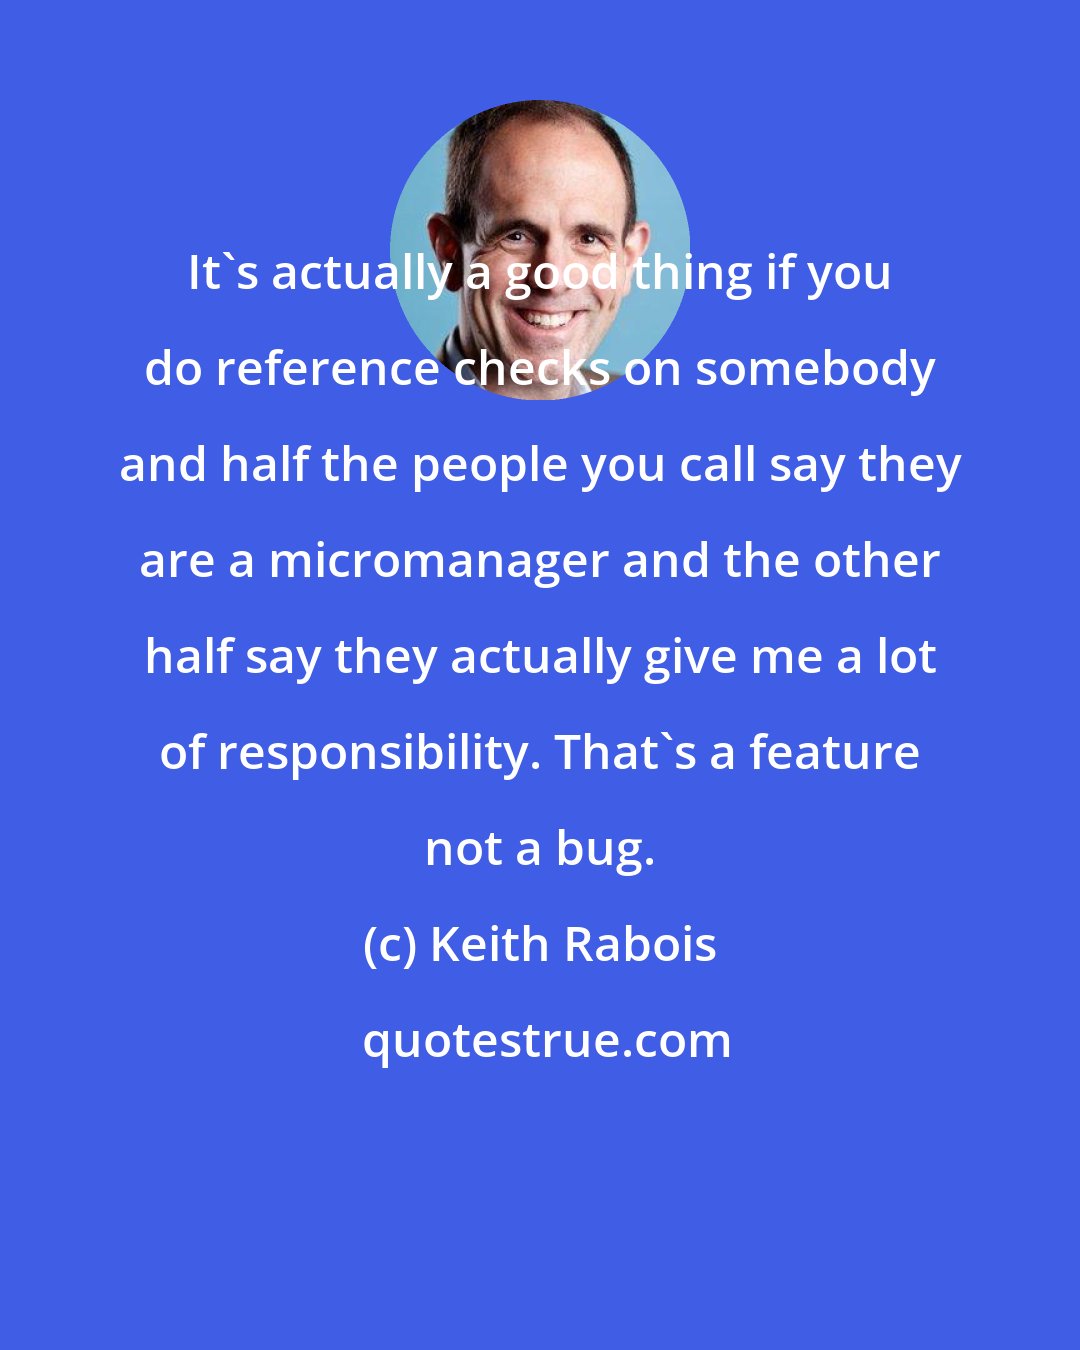 Keith Rabois: It's actually a good thing if you do reference checks on somebody and half the people you call say they are a micromanager and the other half say they actually give me a lot of responsibility. That's a feature not a bug.